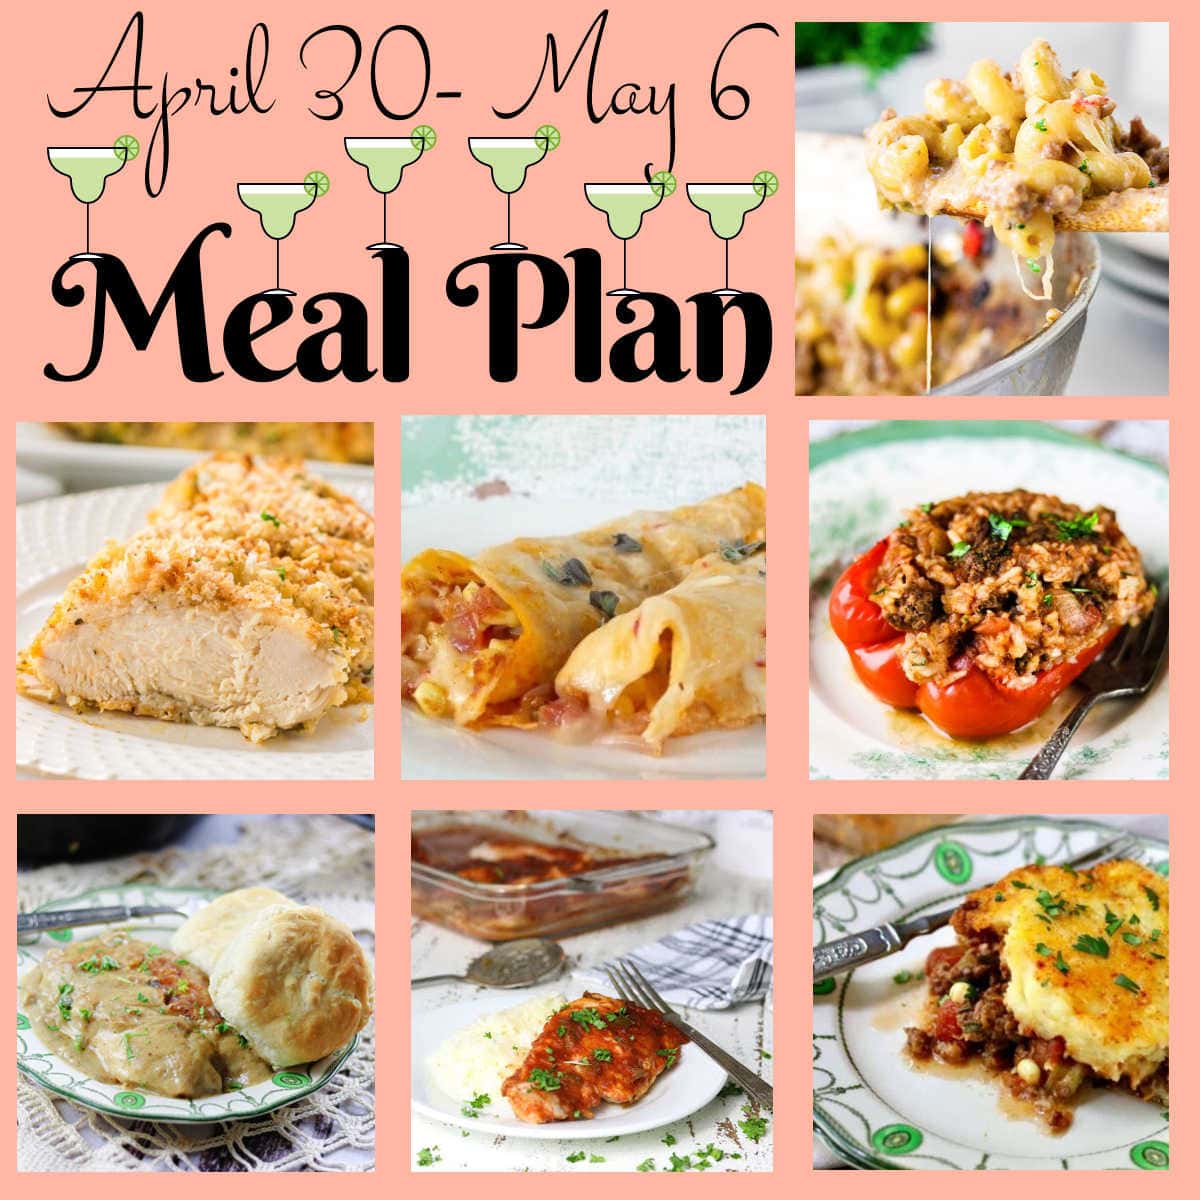 Collage of image showing the main dishes in this meal plan.